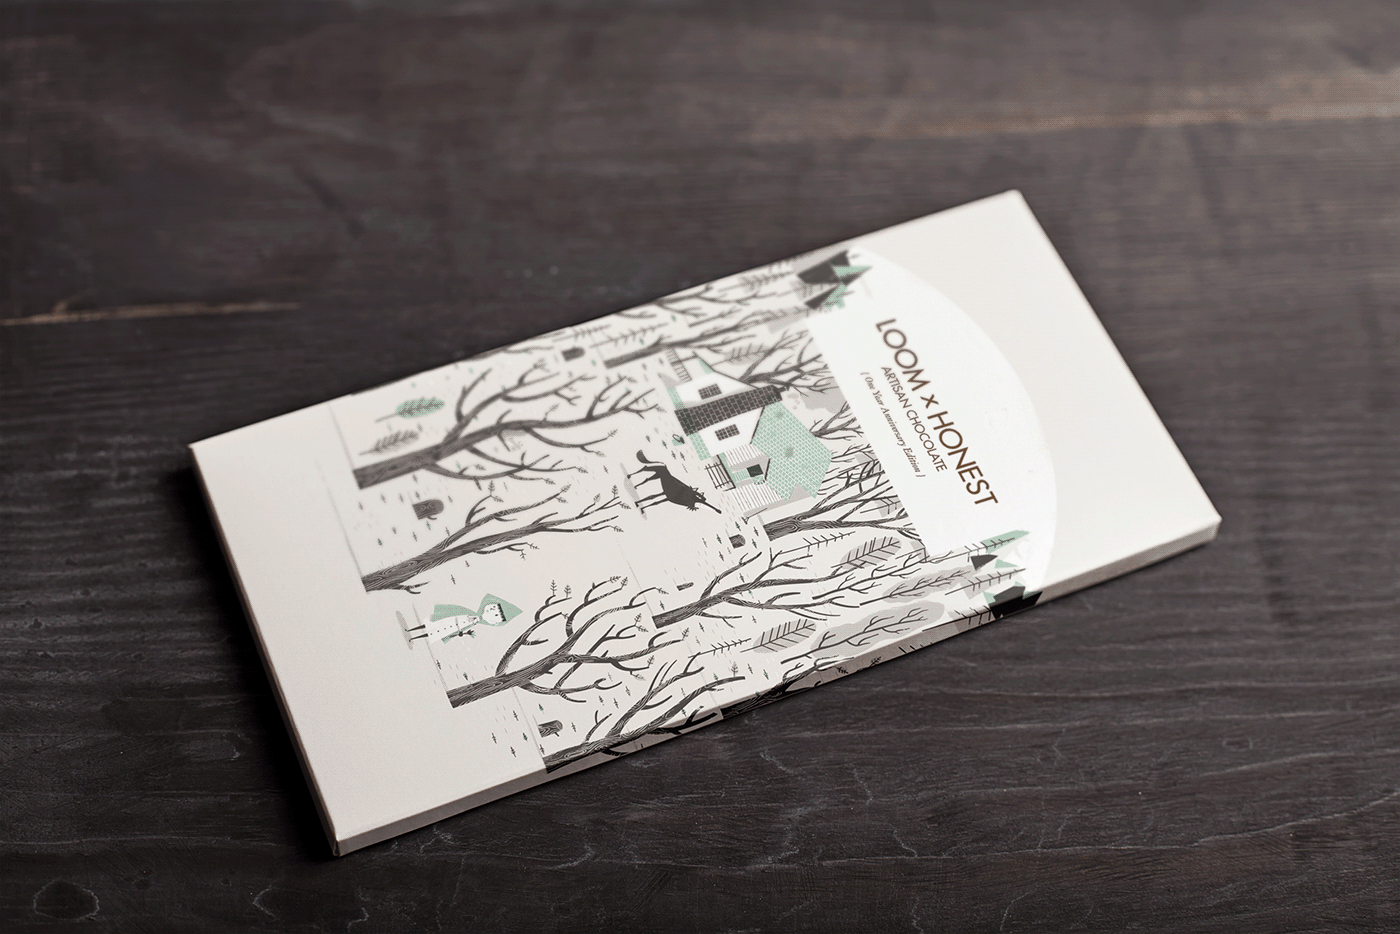 Chocolate packaging design and illustration.